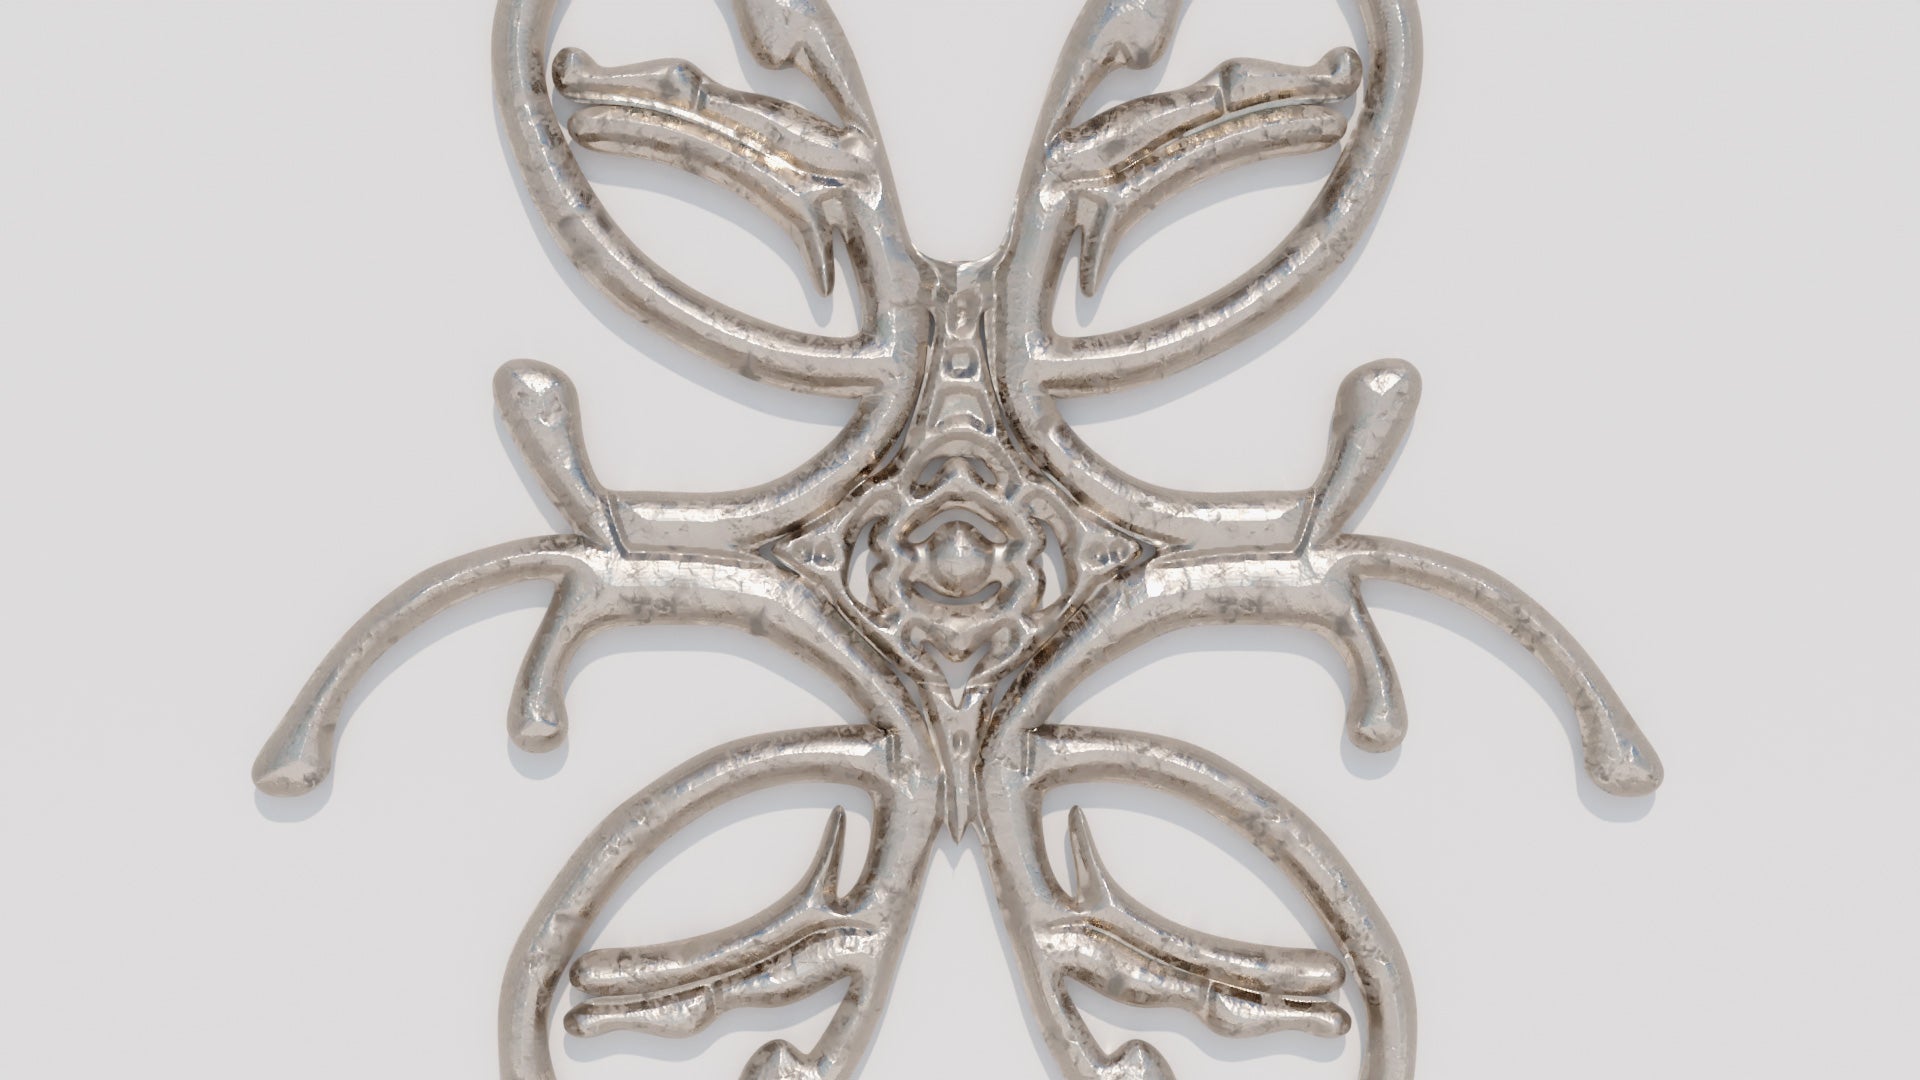 3D model of a medieval fantasy sigil or crest in the shape of an ornamental cross, for Blender and OBJ with PBR textures and low polycount